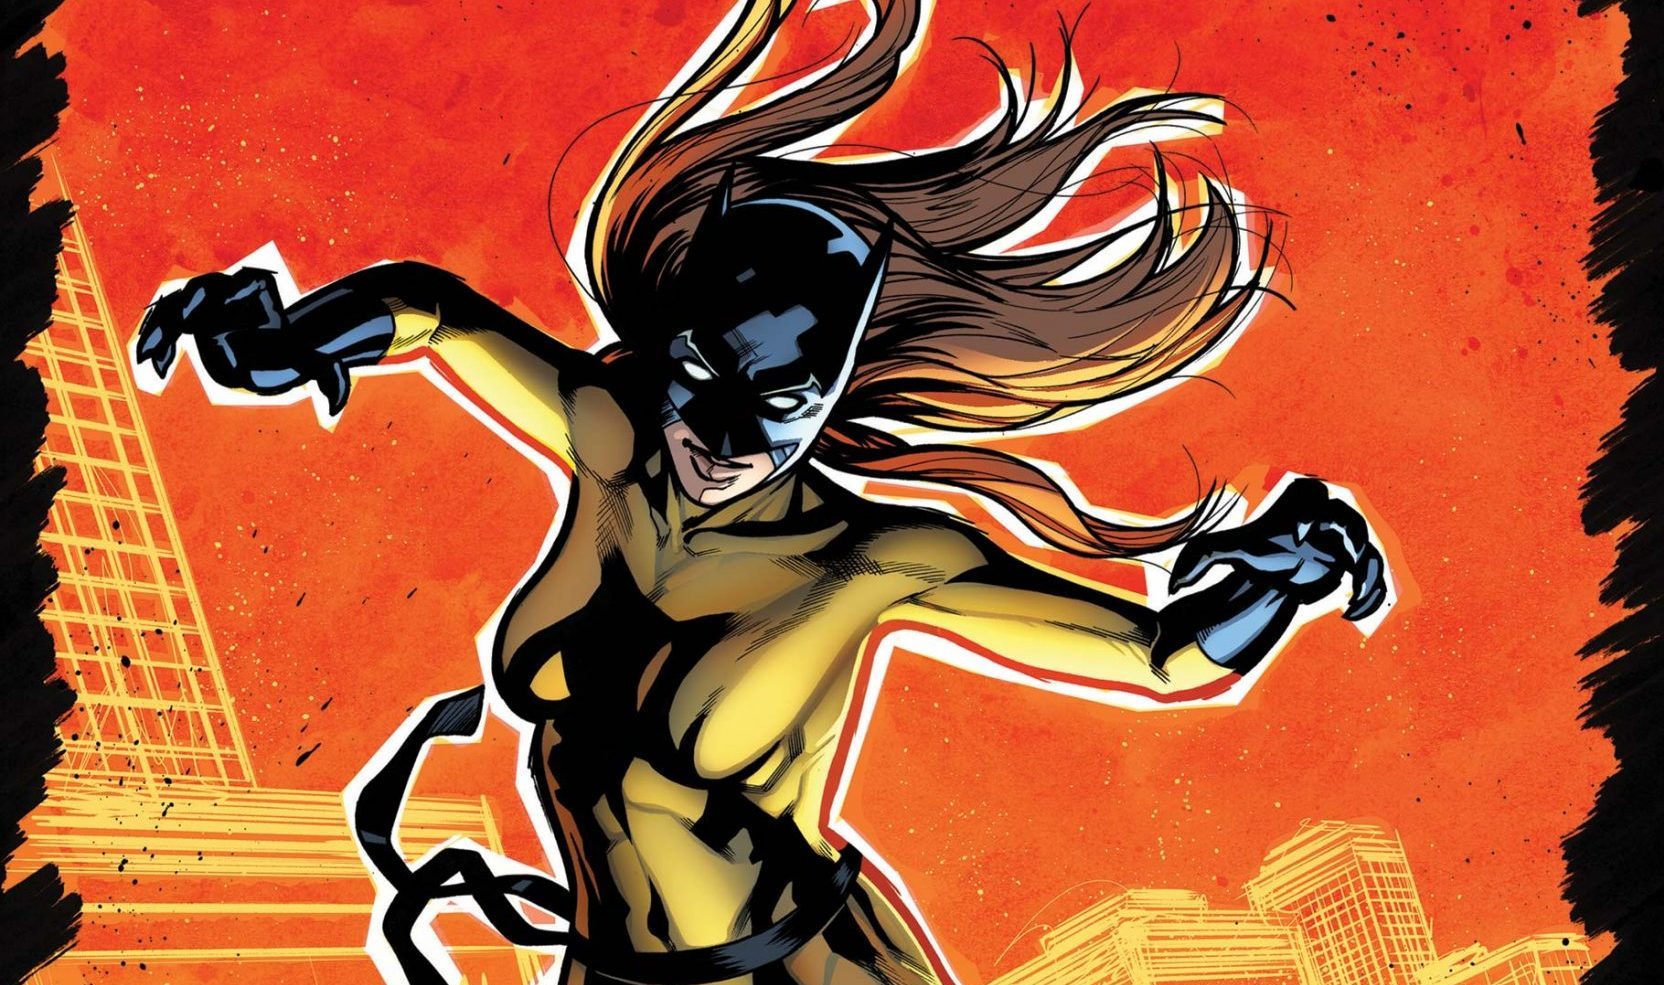 'Hellcat' #1 takes its supernatural hero to hell and back